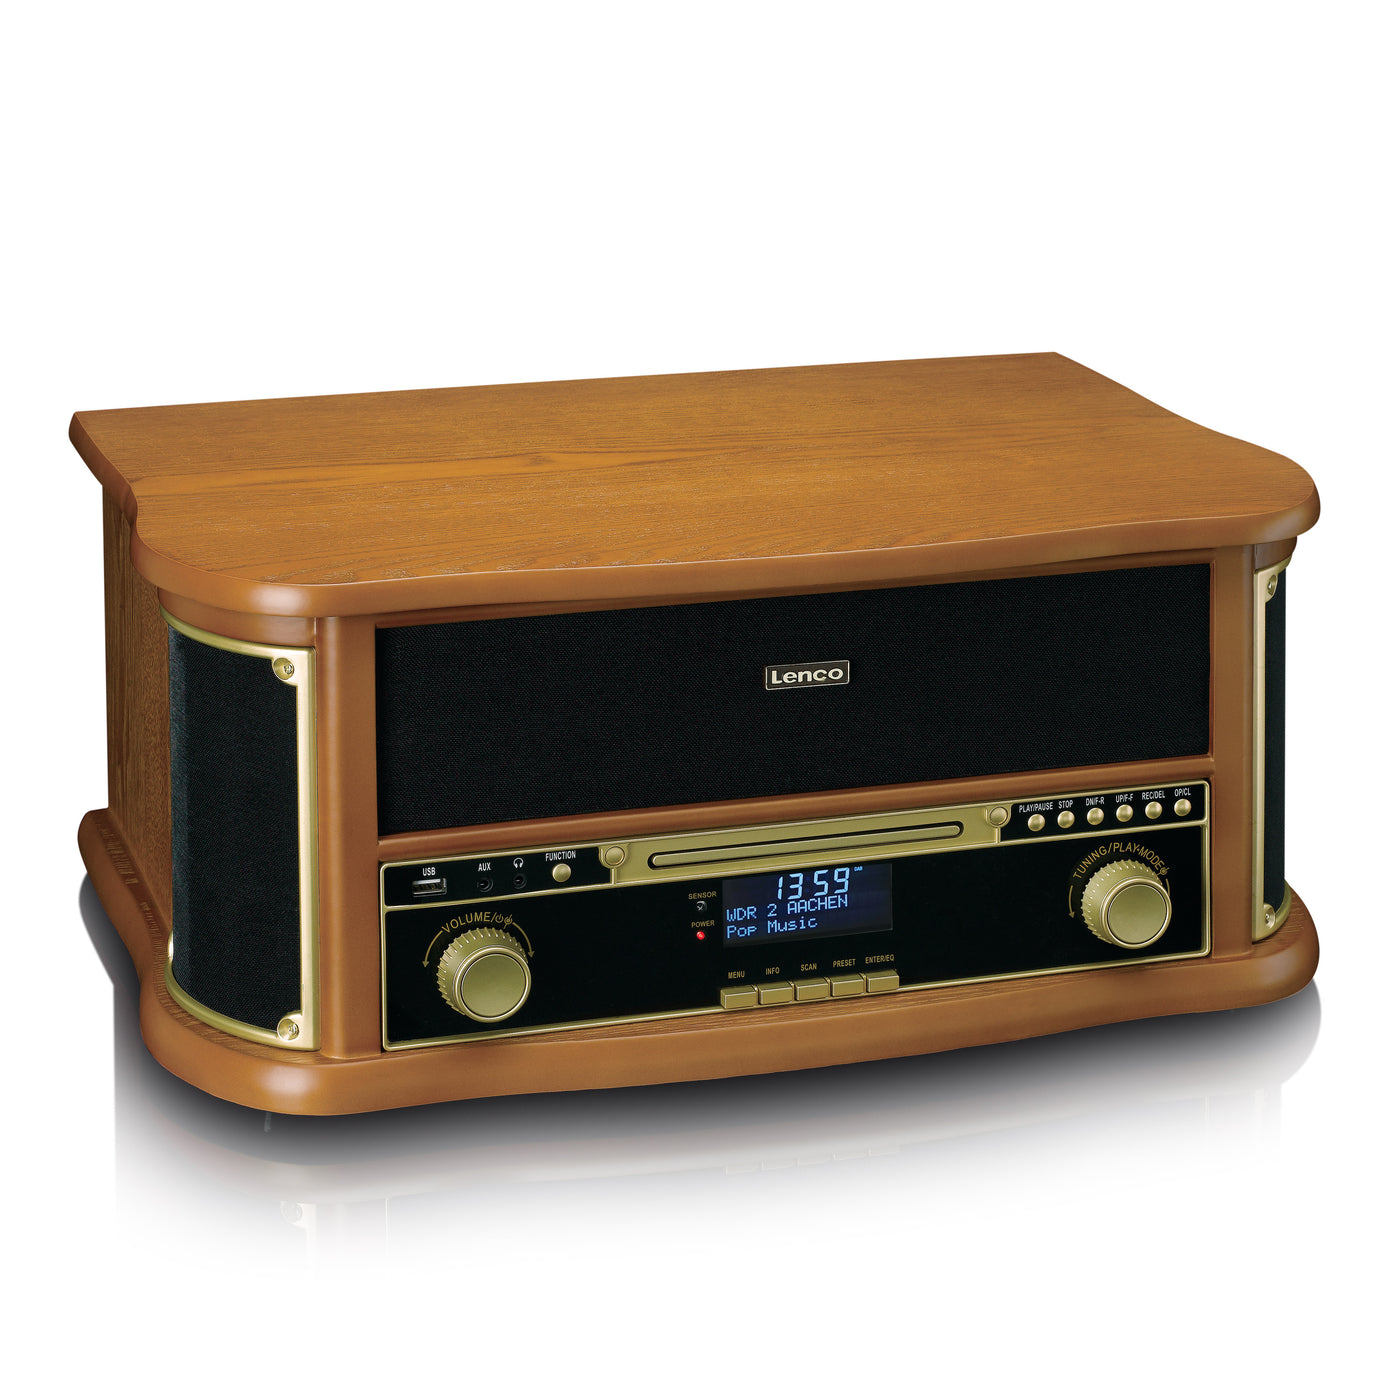 CLASSIC PHONO TCD-2571WD - Wooden retro Record Player with Bluetooth®, DAB+/FM radio, USB encoding, CD player, cassette player, and built-in speakers - Wood